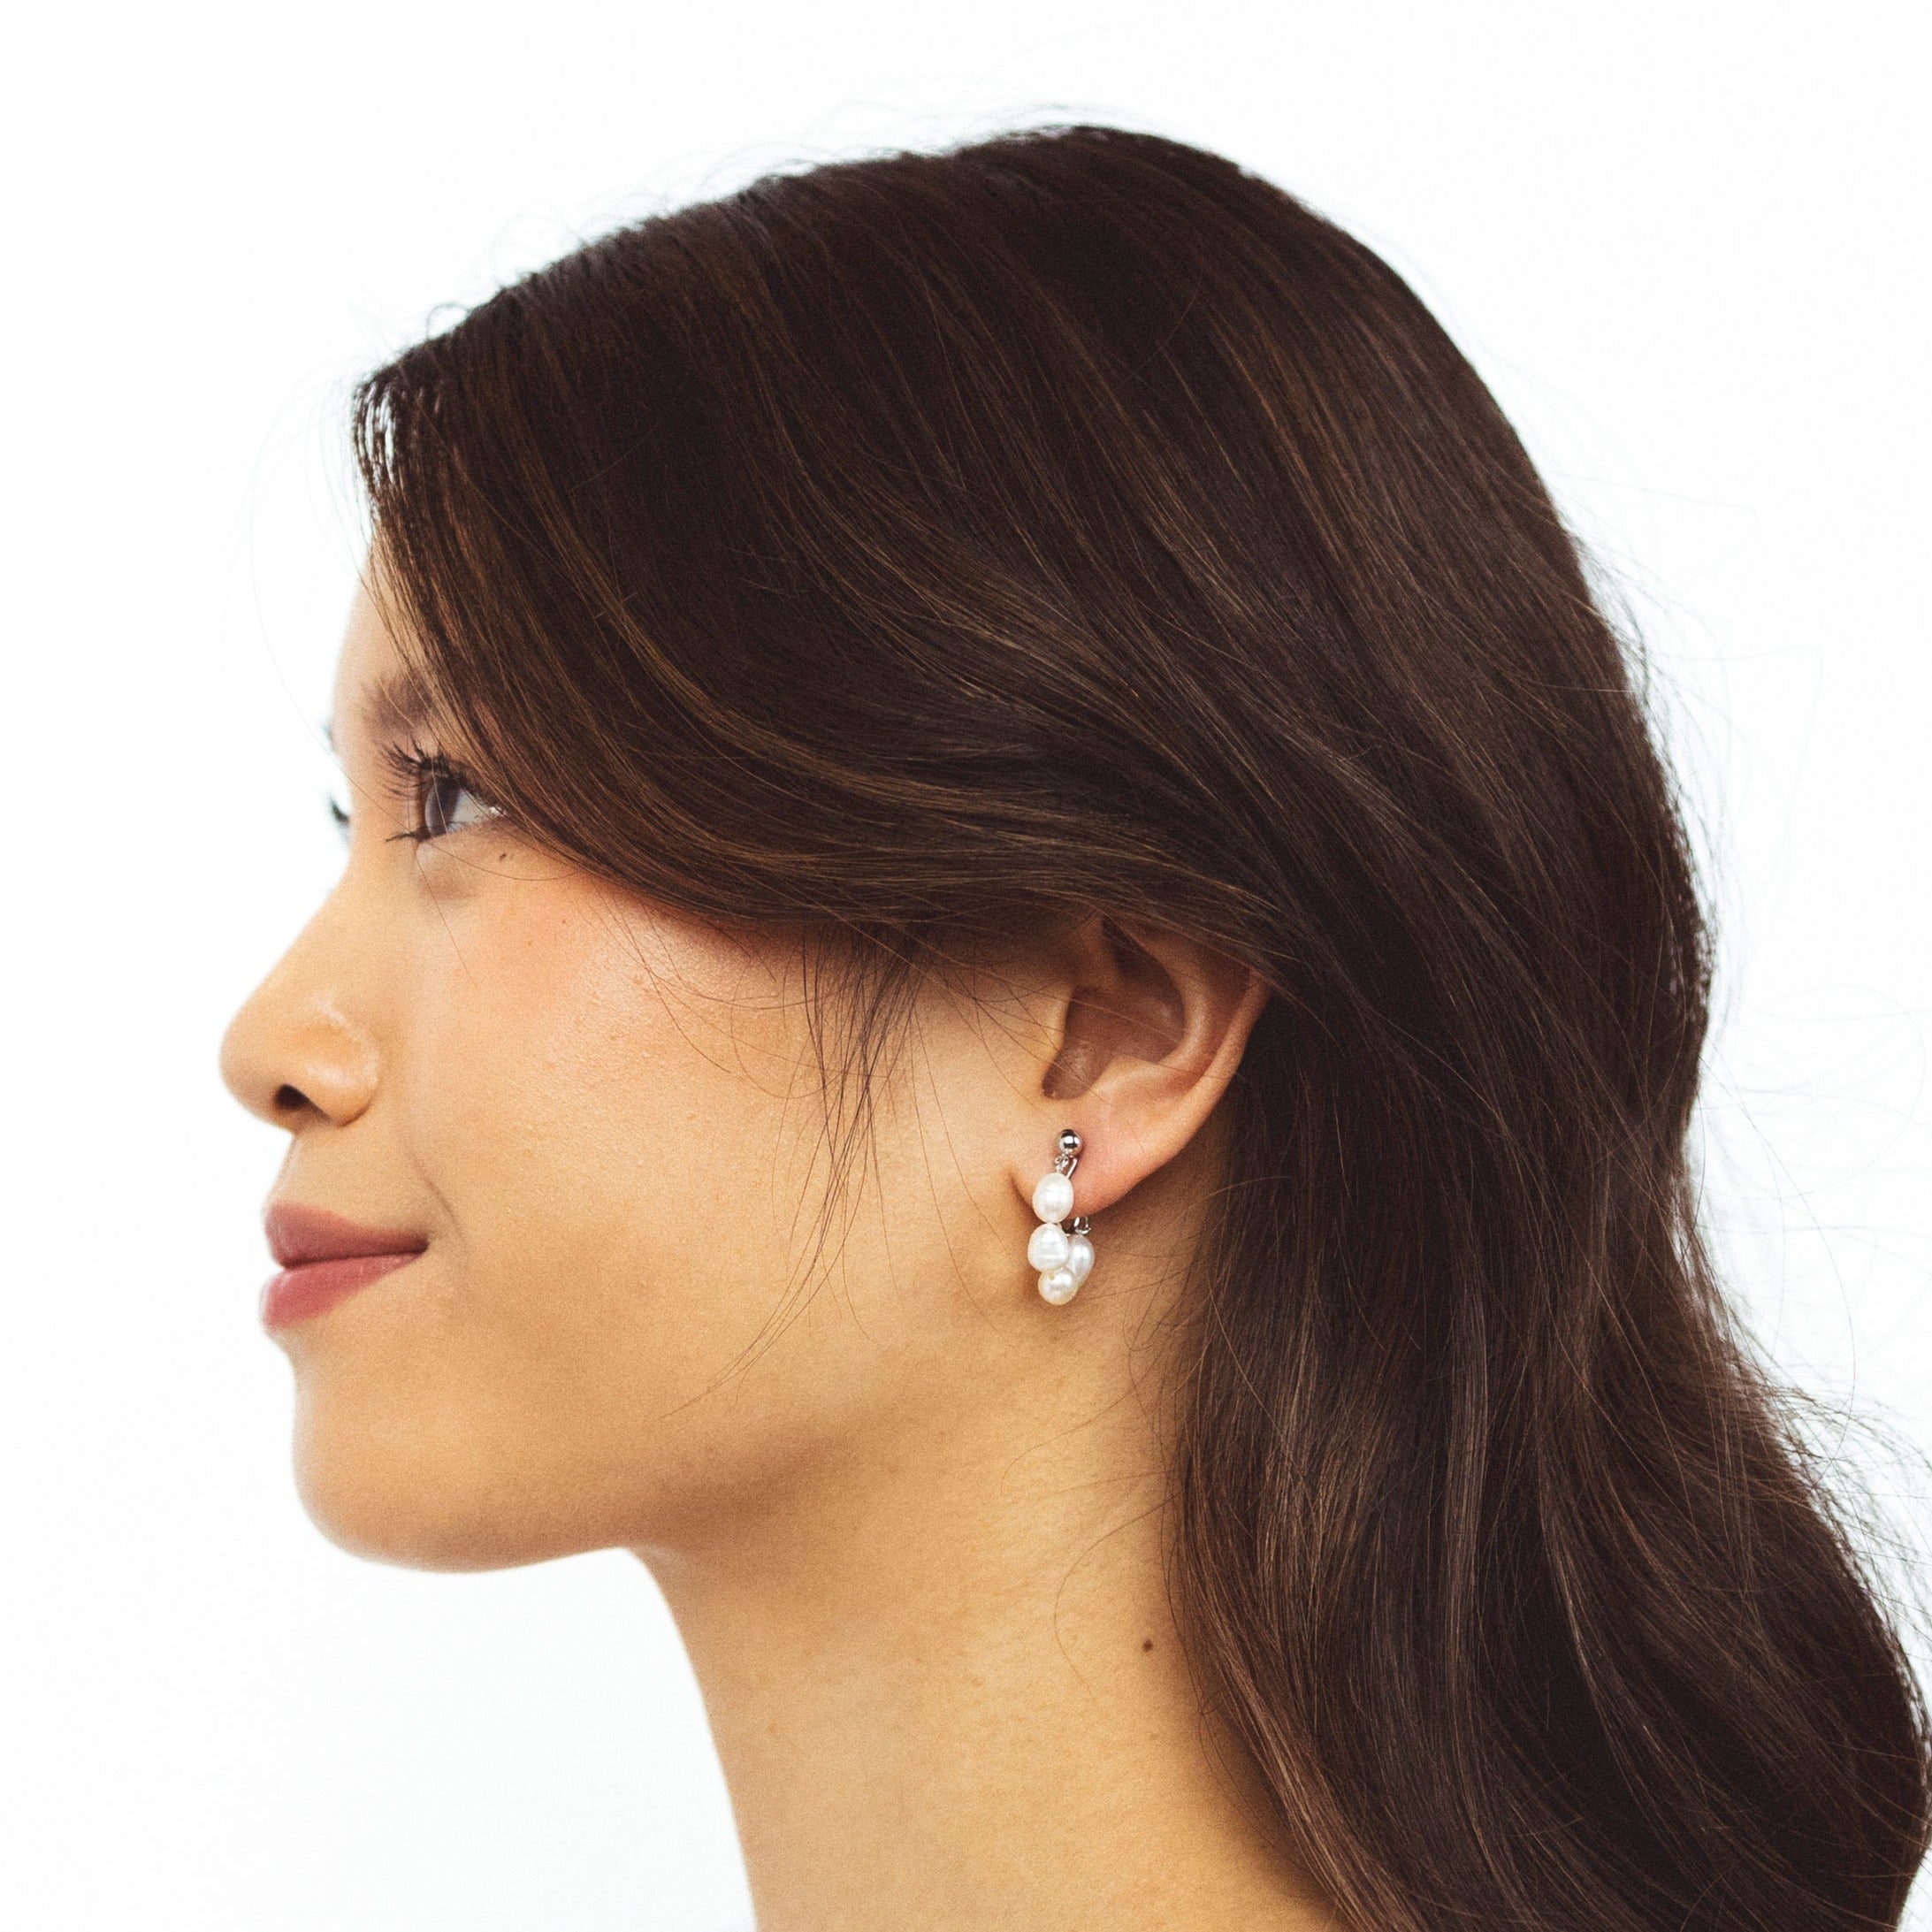 A model wearing the Blair Clip On Earrings. Our earrings offer a secure 24-hour hold and adjustable fit for all ear types, ideal for sensitive or stretched ears. Elevate your everyday ensemble with a touch of sophistication.